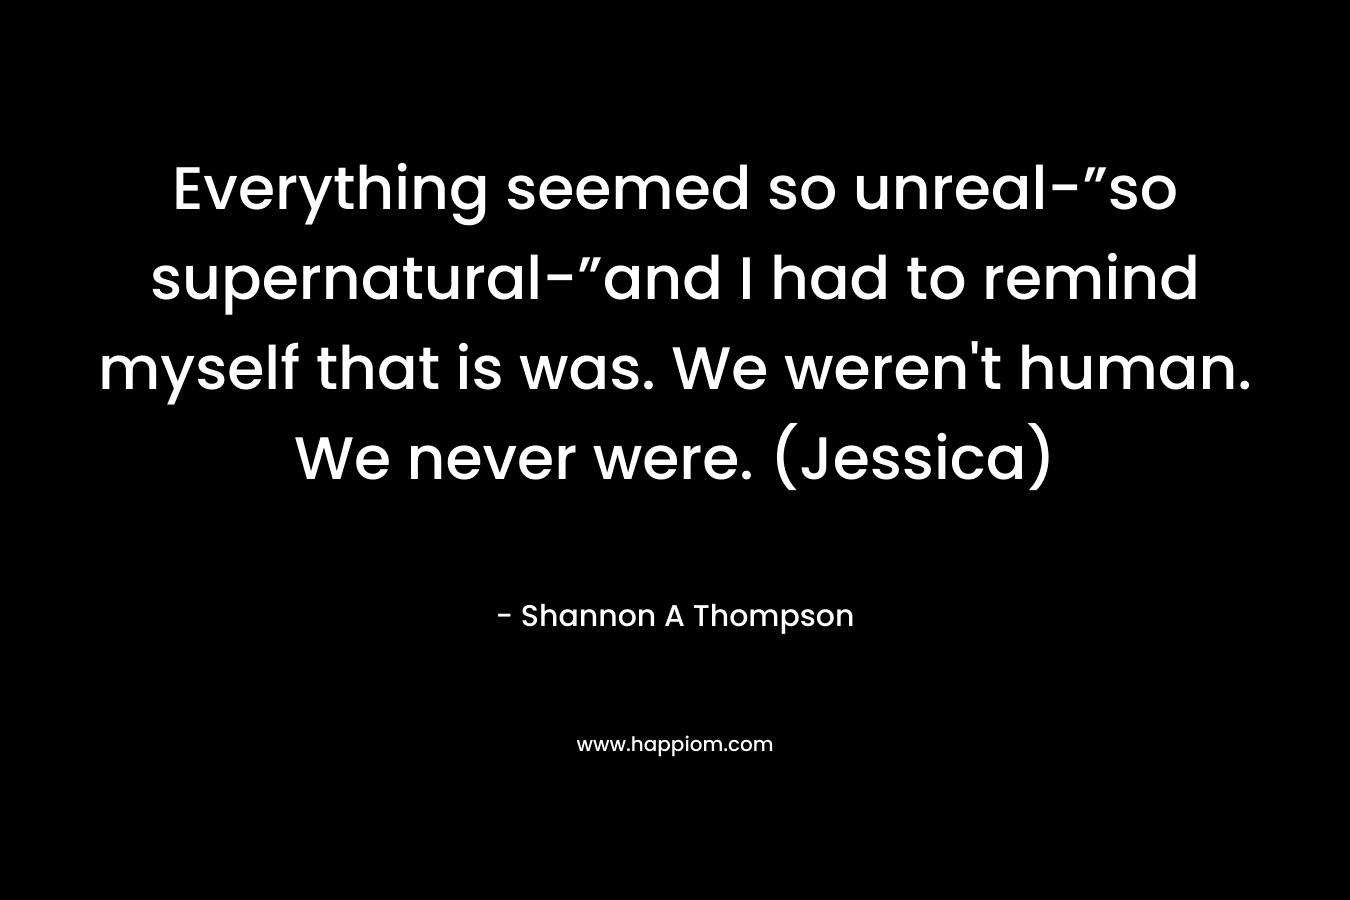 Everything seemed so unreal-”so supernatural-”and I had to remind myself that is was. We weren't human. We never were. (Jessica)